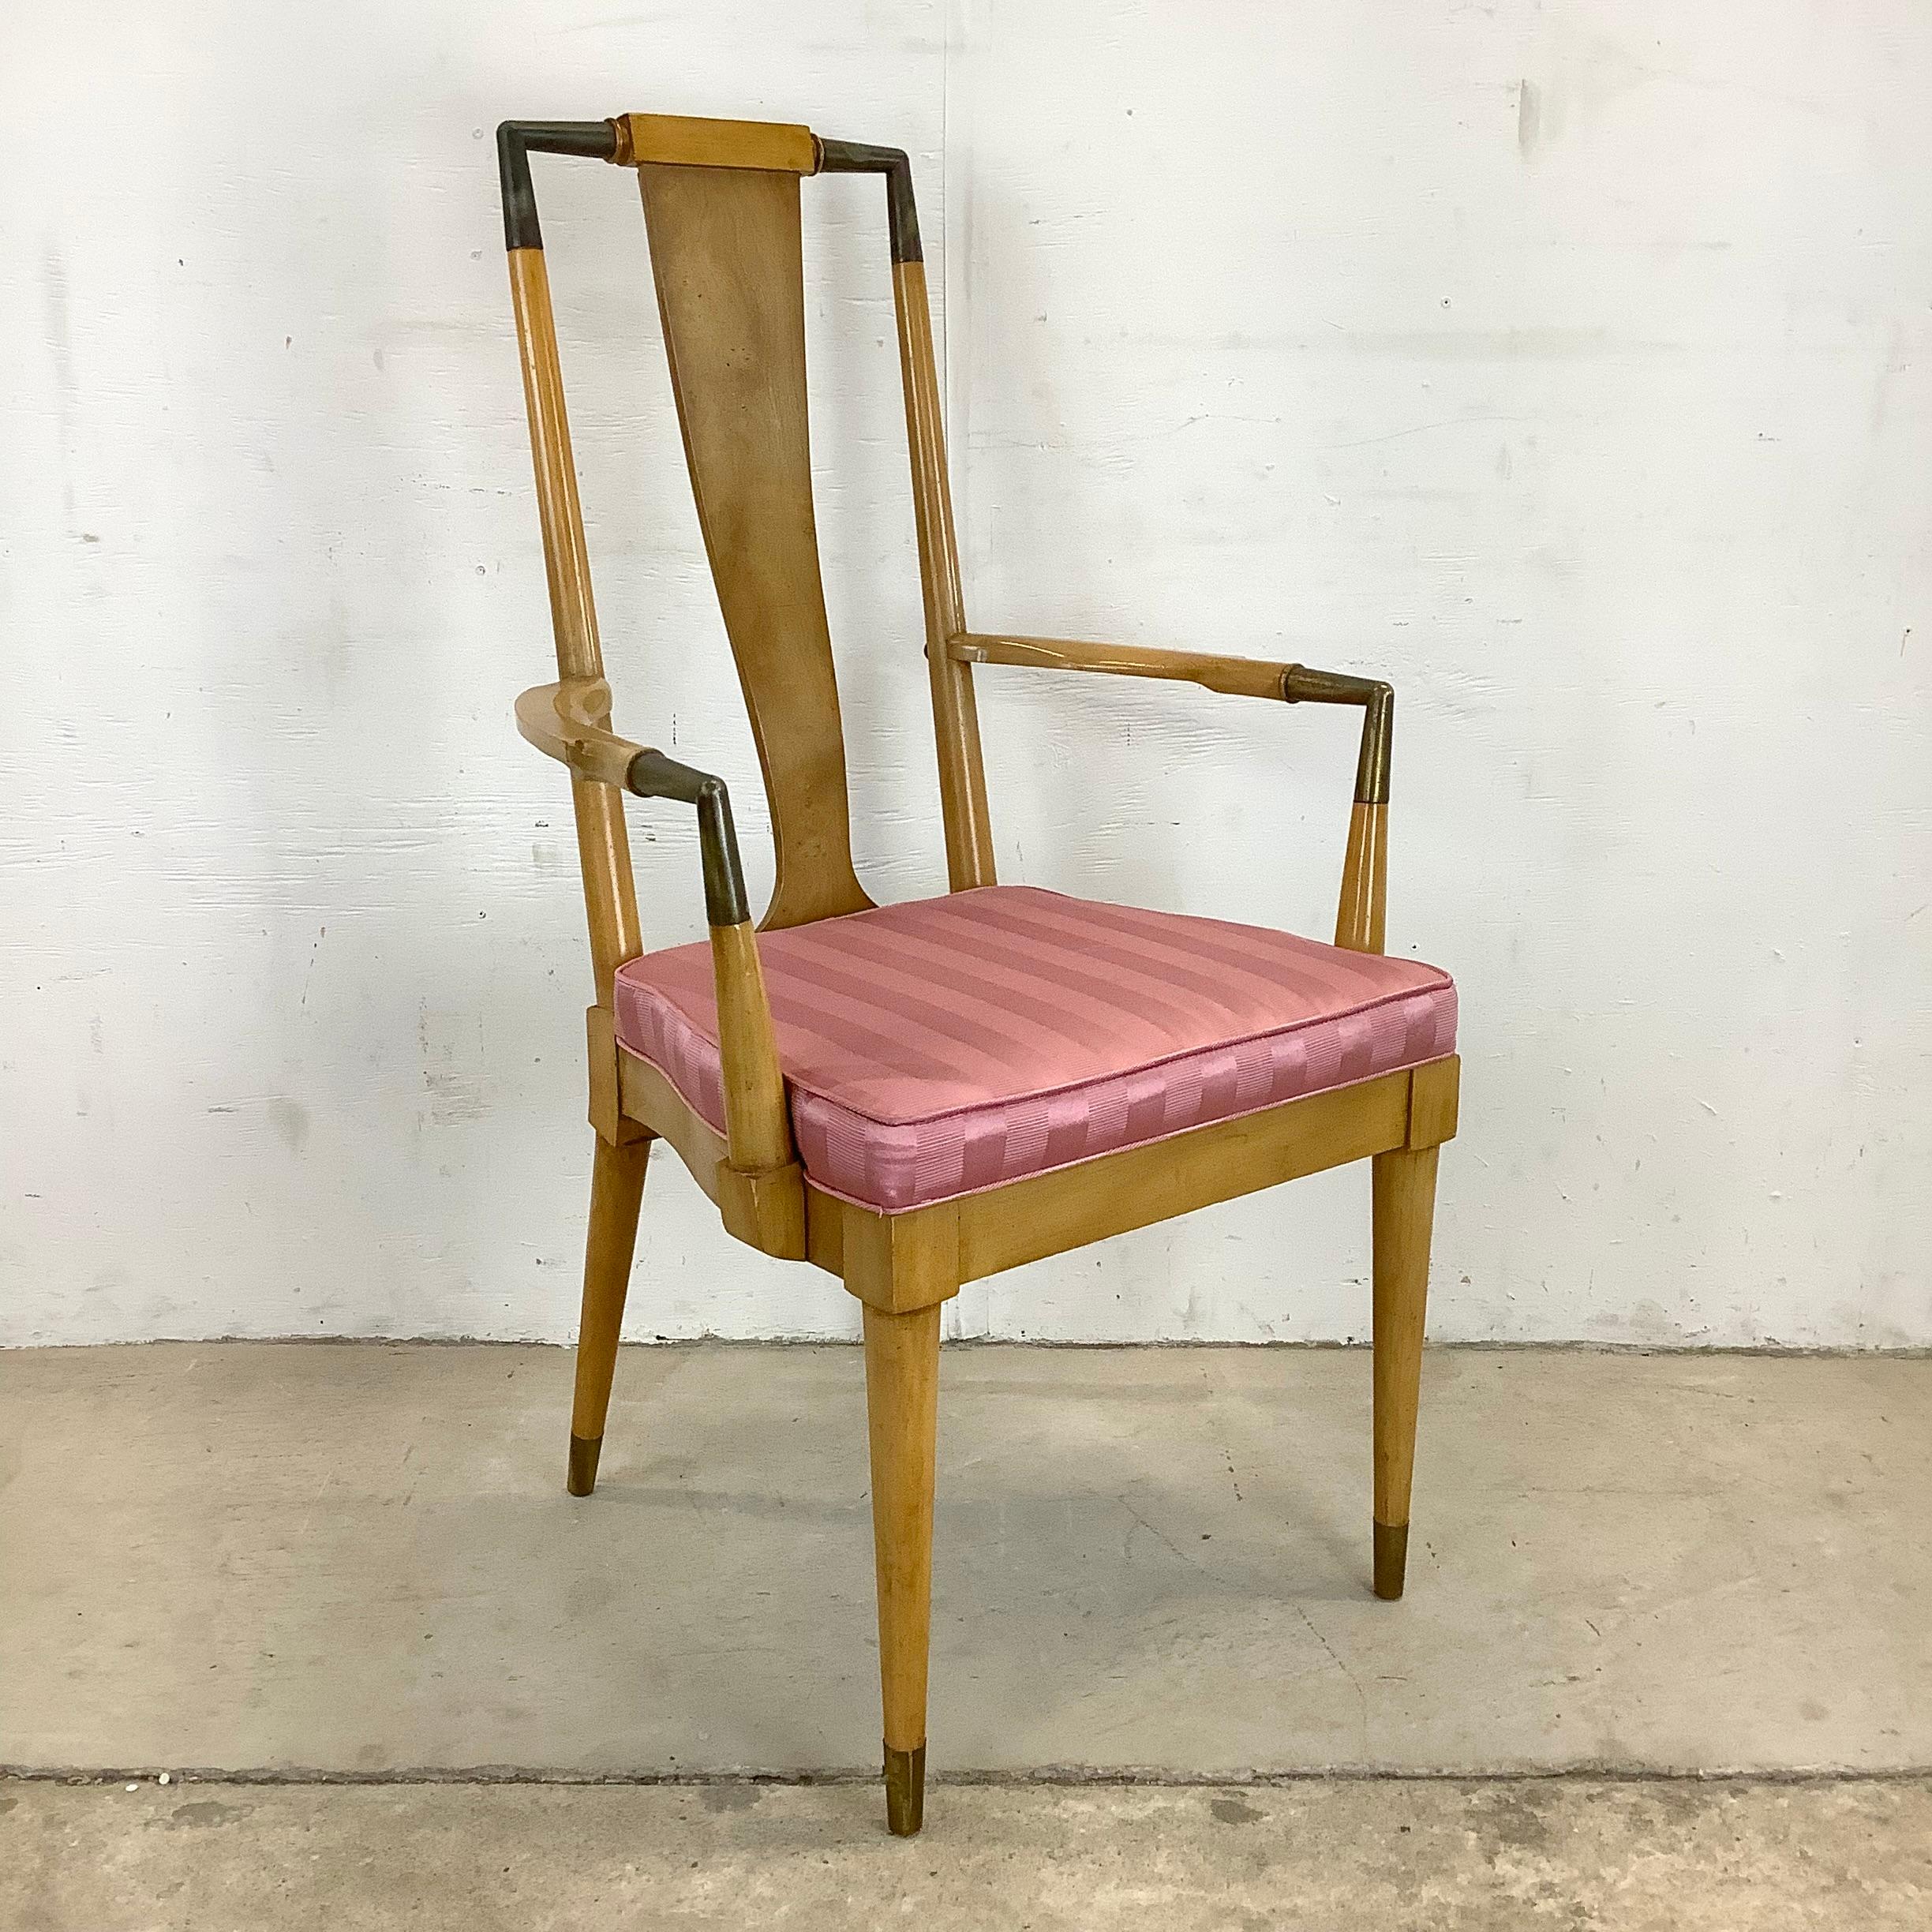 This striking set of six vintage modern dining chairs make a unique statement in any dining room setting, mixing burlwood finish and brass details, complimented by upholstered pink seats. The matching set of high back dining chairs includes five